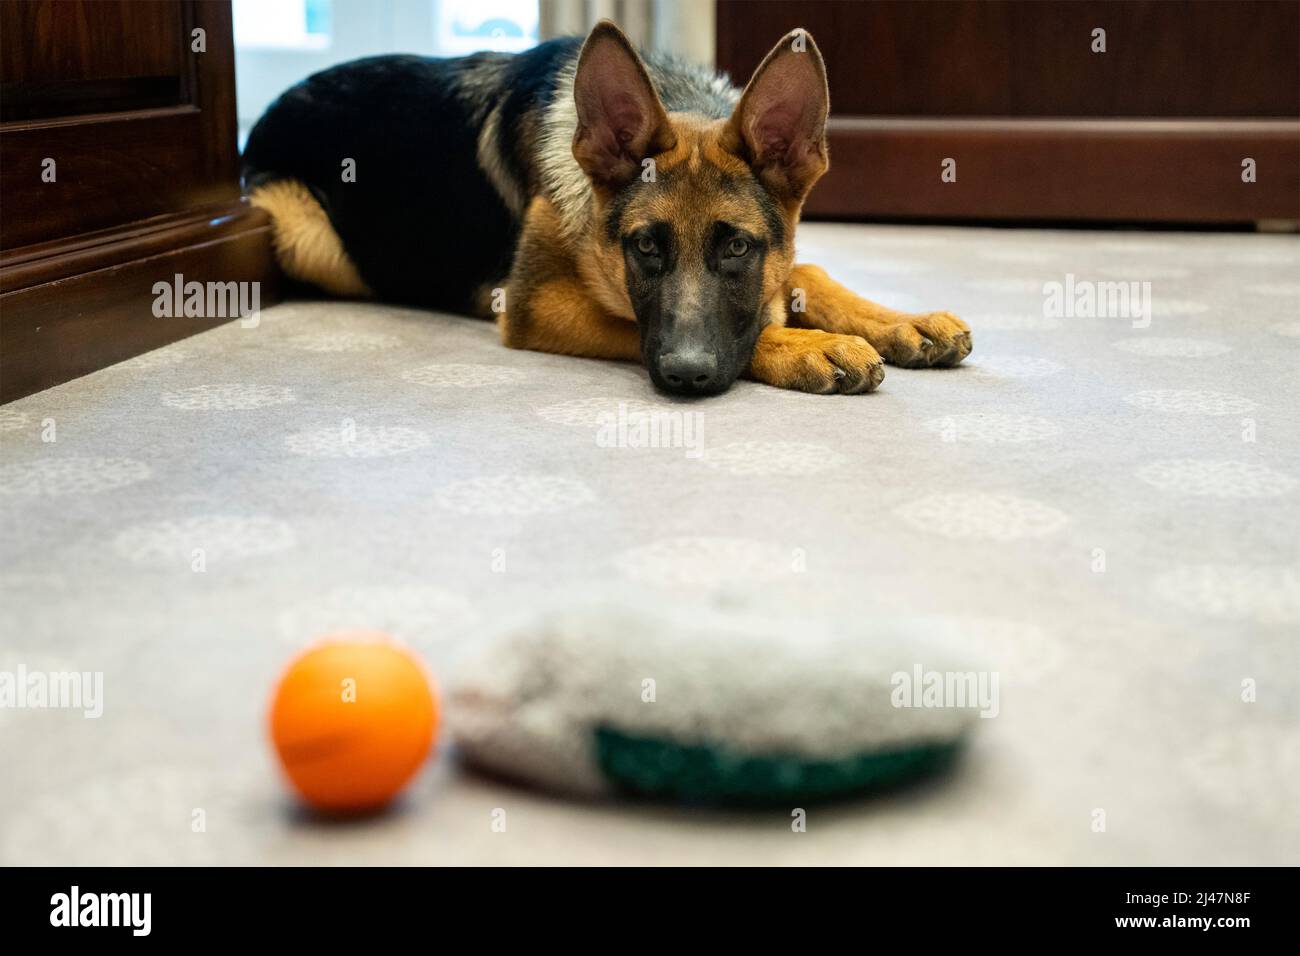 Washington, United States of America. 20 January, 2022. Commander, the pet dog of U.S President Joe Biden with his favorite toys as he waits at the Outer Oval Office of the White House, January 20, 2022 in Washington, D.C.  Credit: Adam Schultz/White House Photo/Alamy Live News Stock Photo